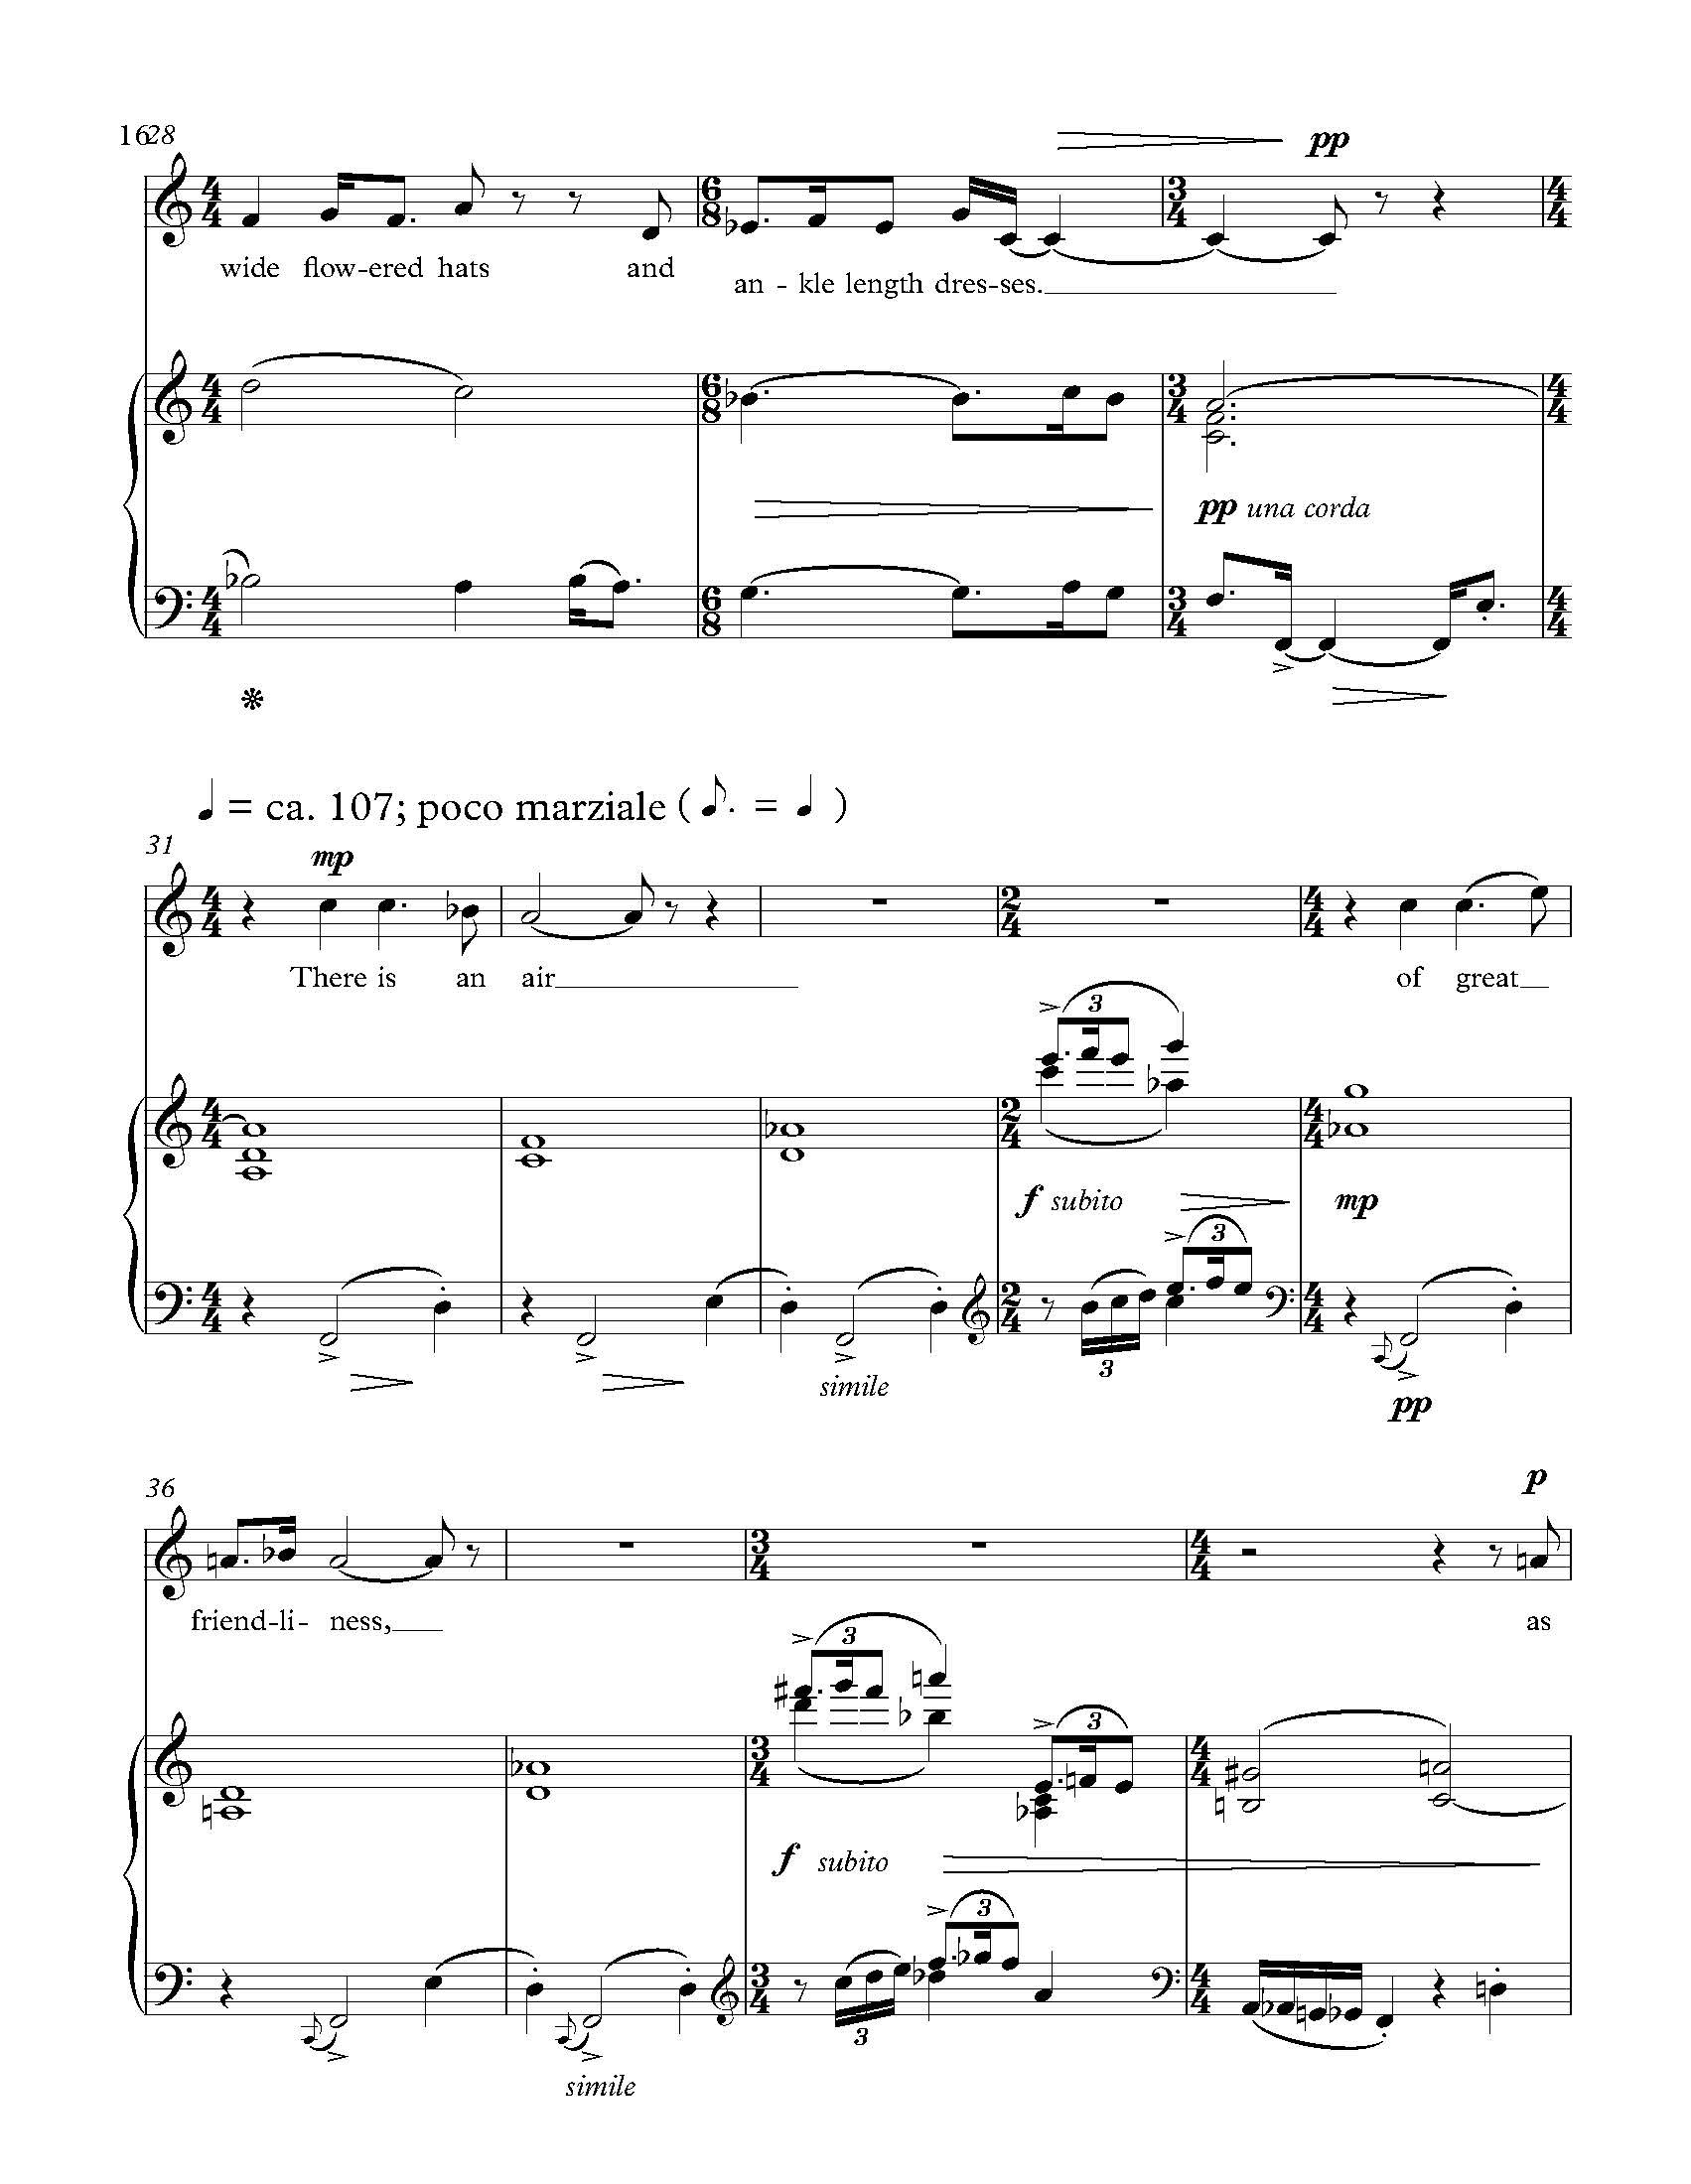 The Explosion - Complete Score_Page_22.jpg